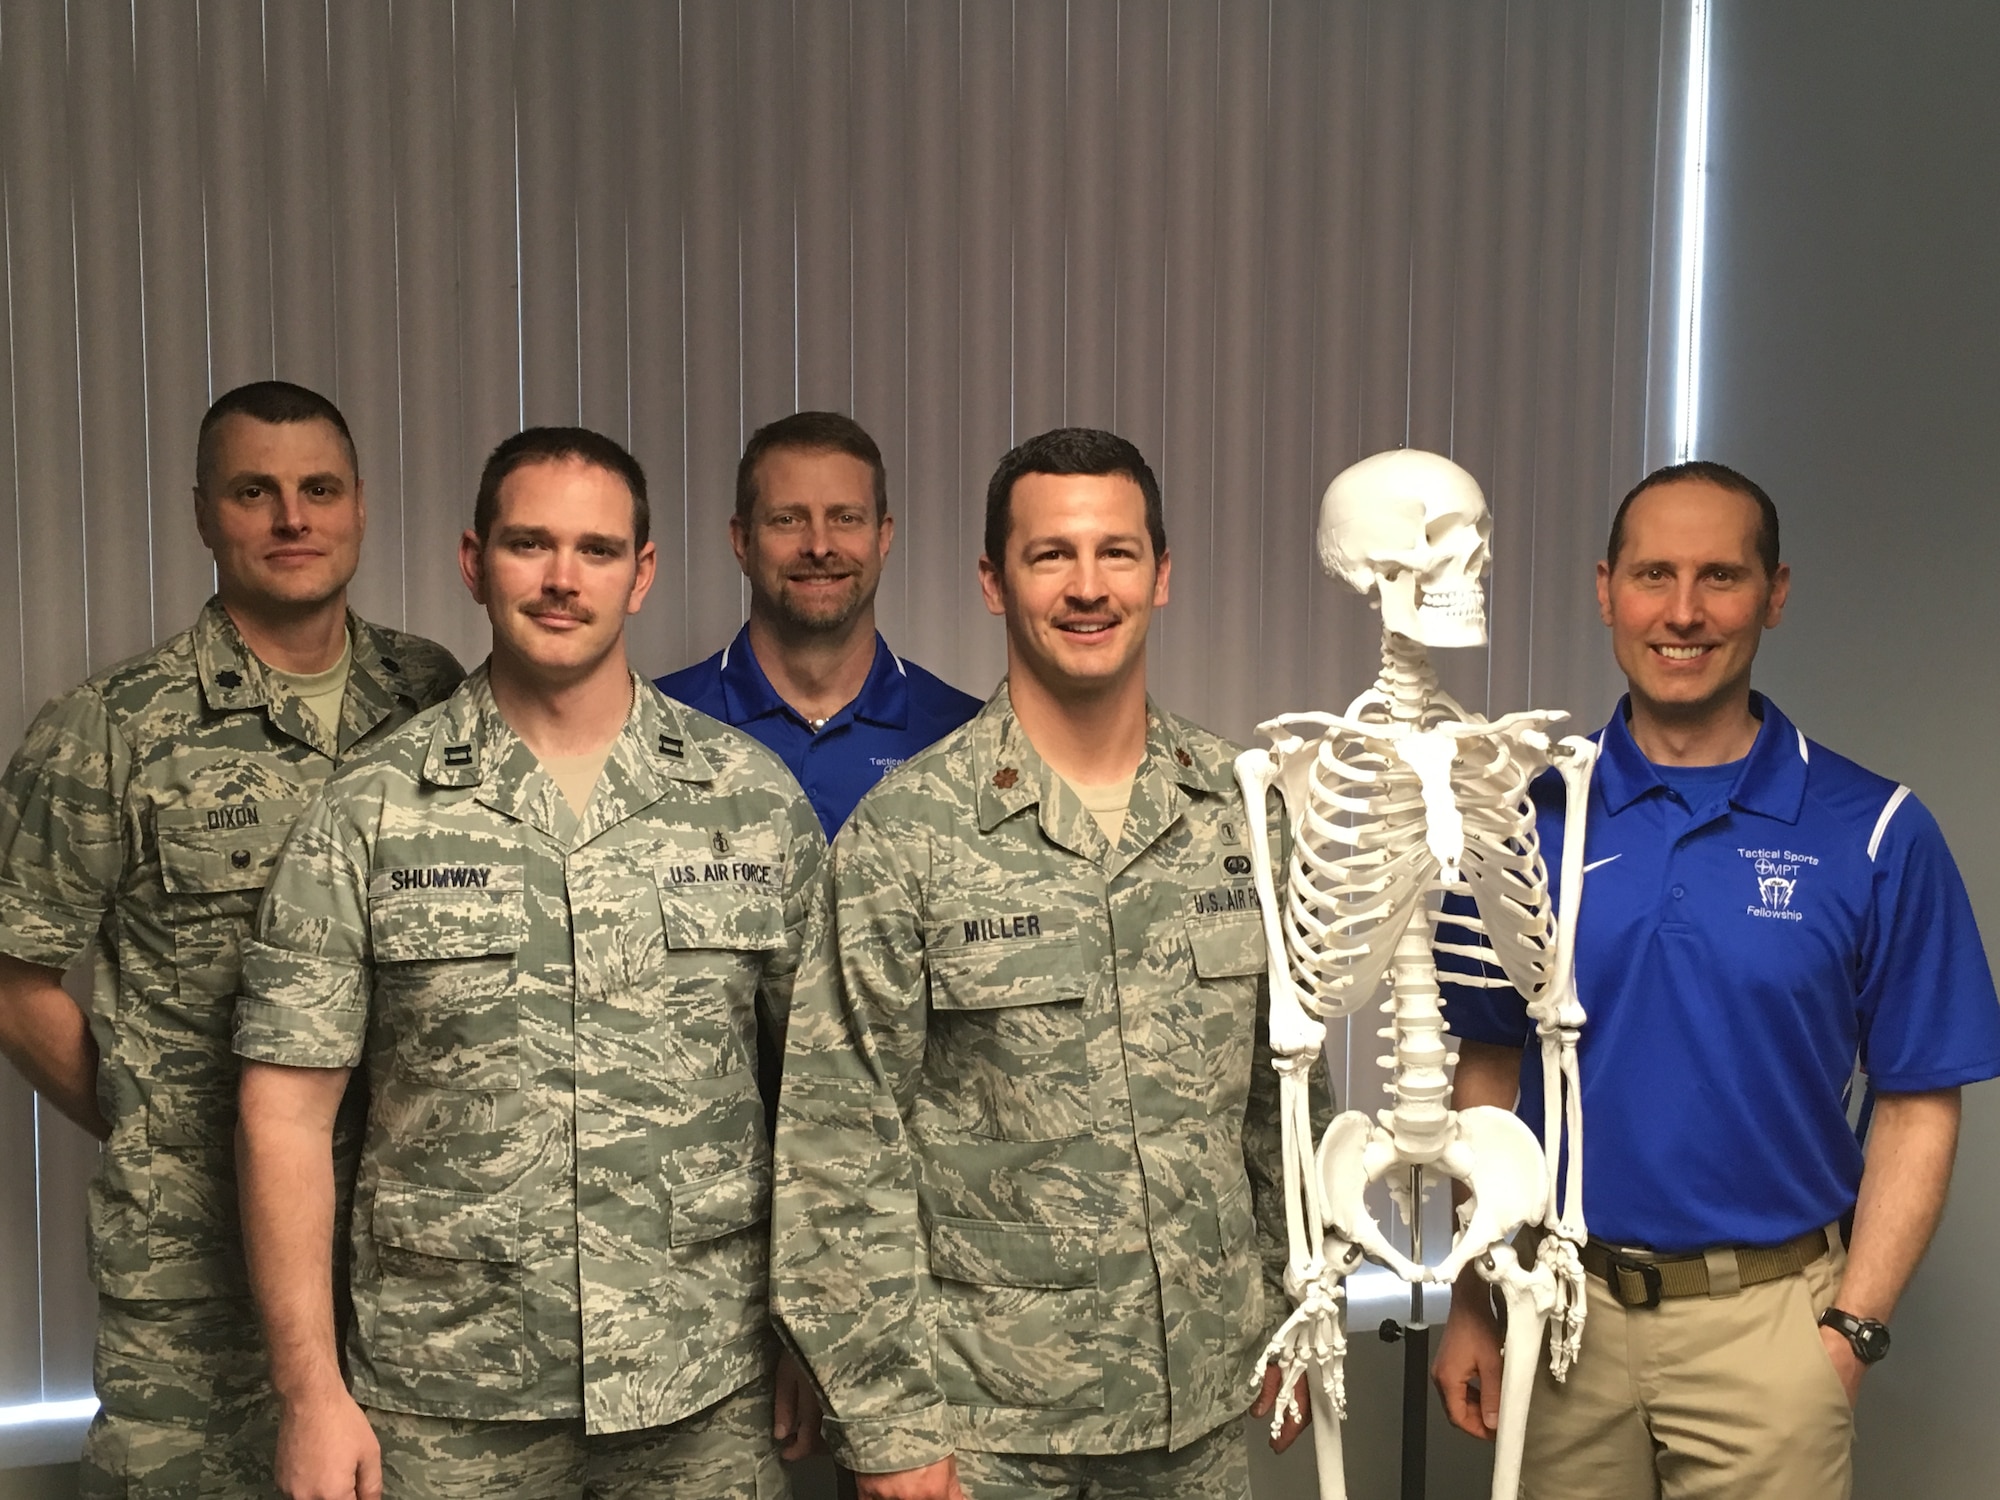 The Air Force Tactical Sports and Orthopedic Manual Physical Therapy Fellowship staff, faculty and current fellows. From left to right: Lt. Col. Joel Dixon (Assistant Fellowship Program Director), Capt. (Dr.) Joshua Shumway (Fellow in Training), Dr. Eric Wilson (Fellowship Program Director), Maj. (Dr.) Ronald Miller (Fellow in Training), Dave The Skeleton (Fellowship Senior Training Aid), Dr. Derek Vraa (Fellowship Senior Faculty Member)